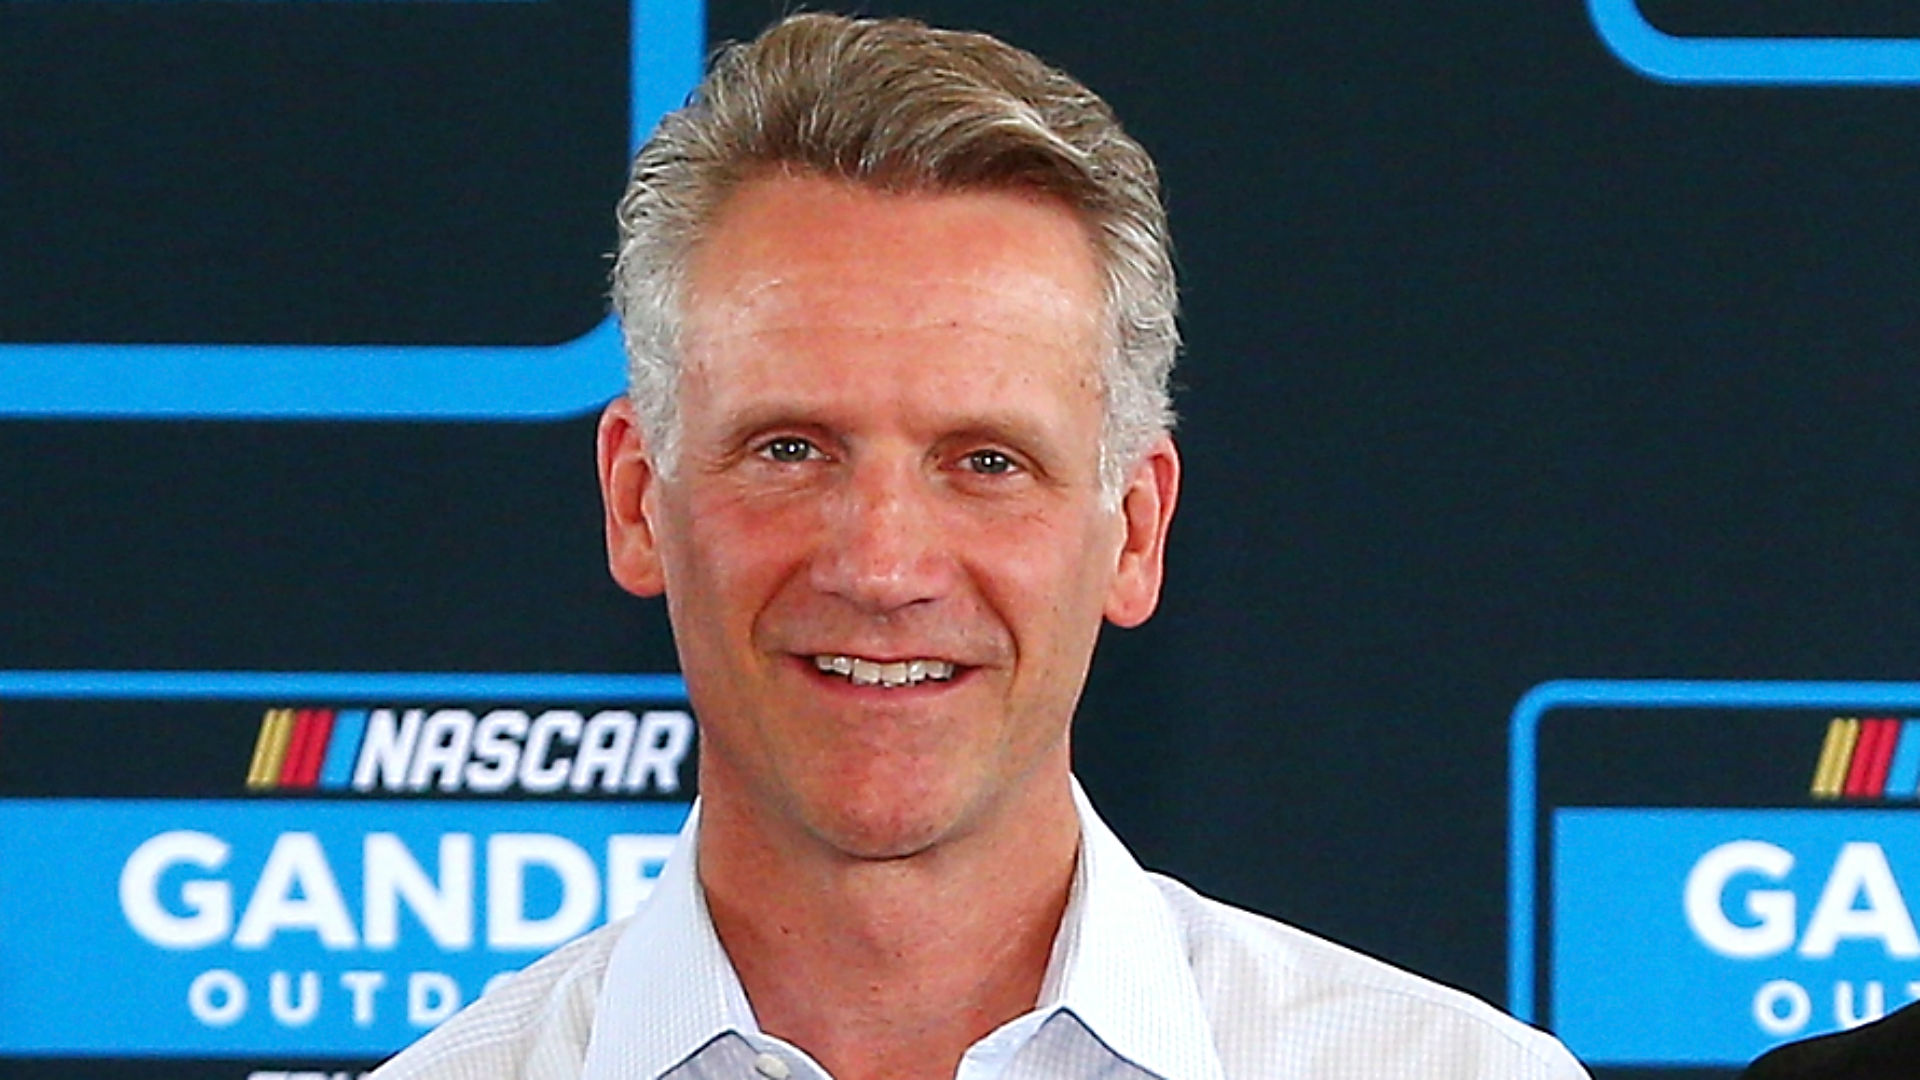 Steve Phelps underscores collaborative efforts in new role as NASCAR president